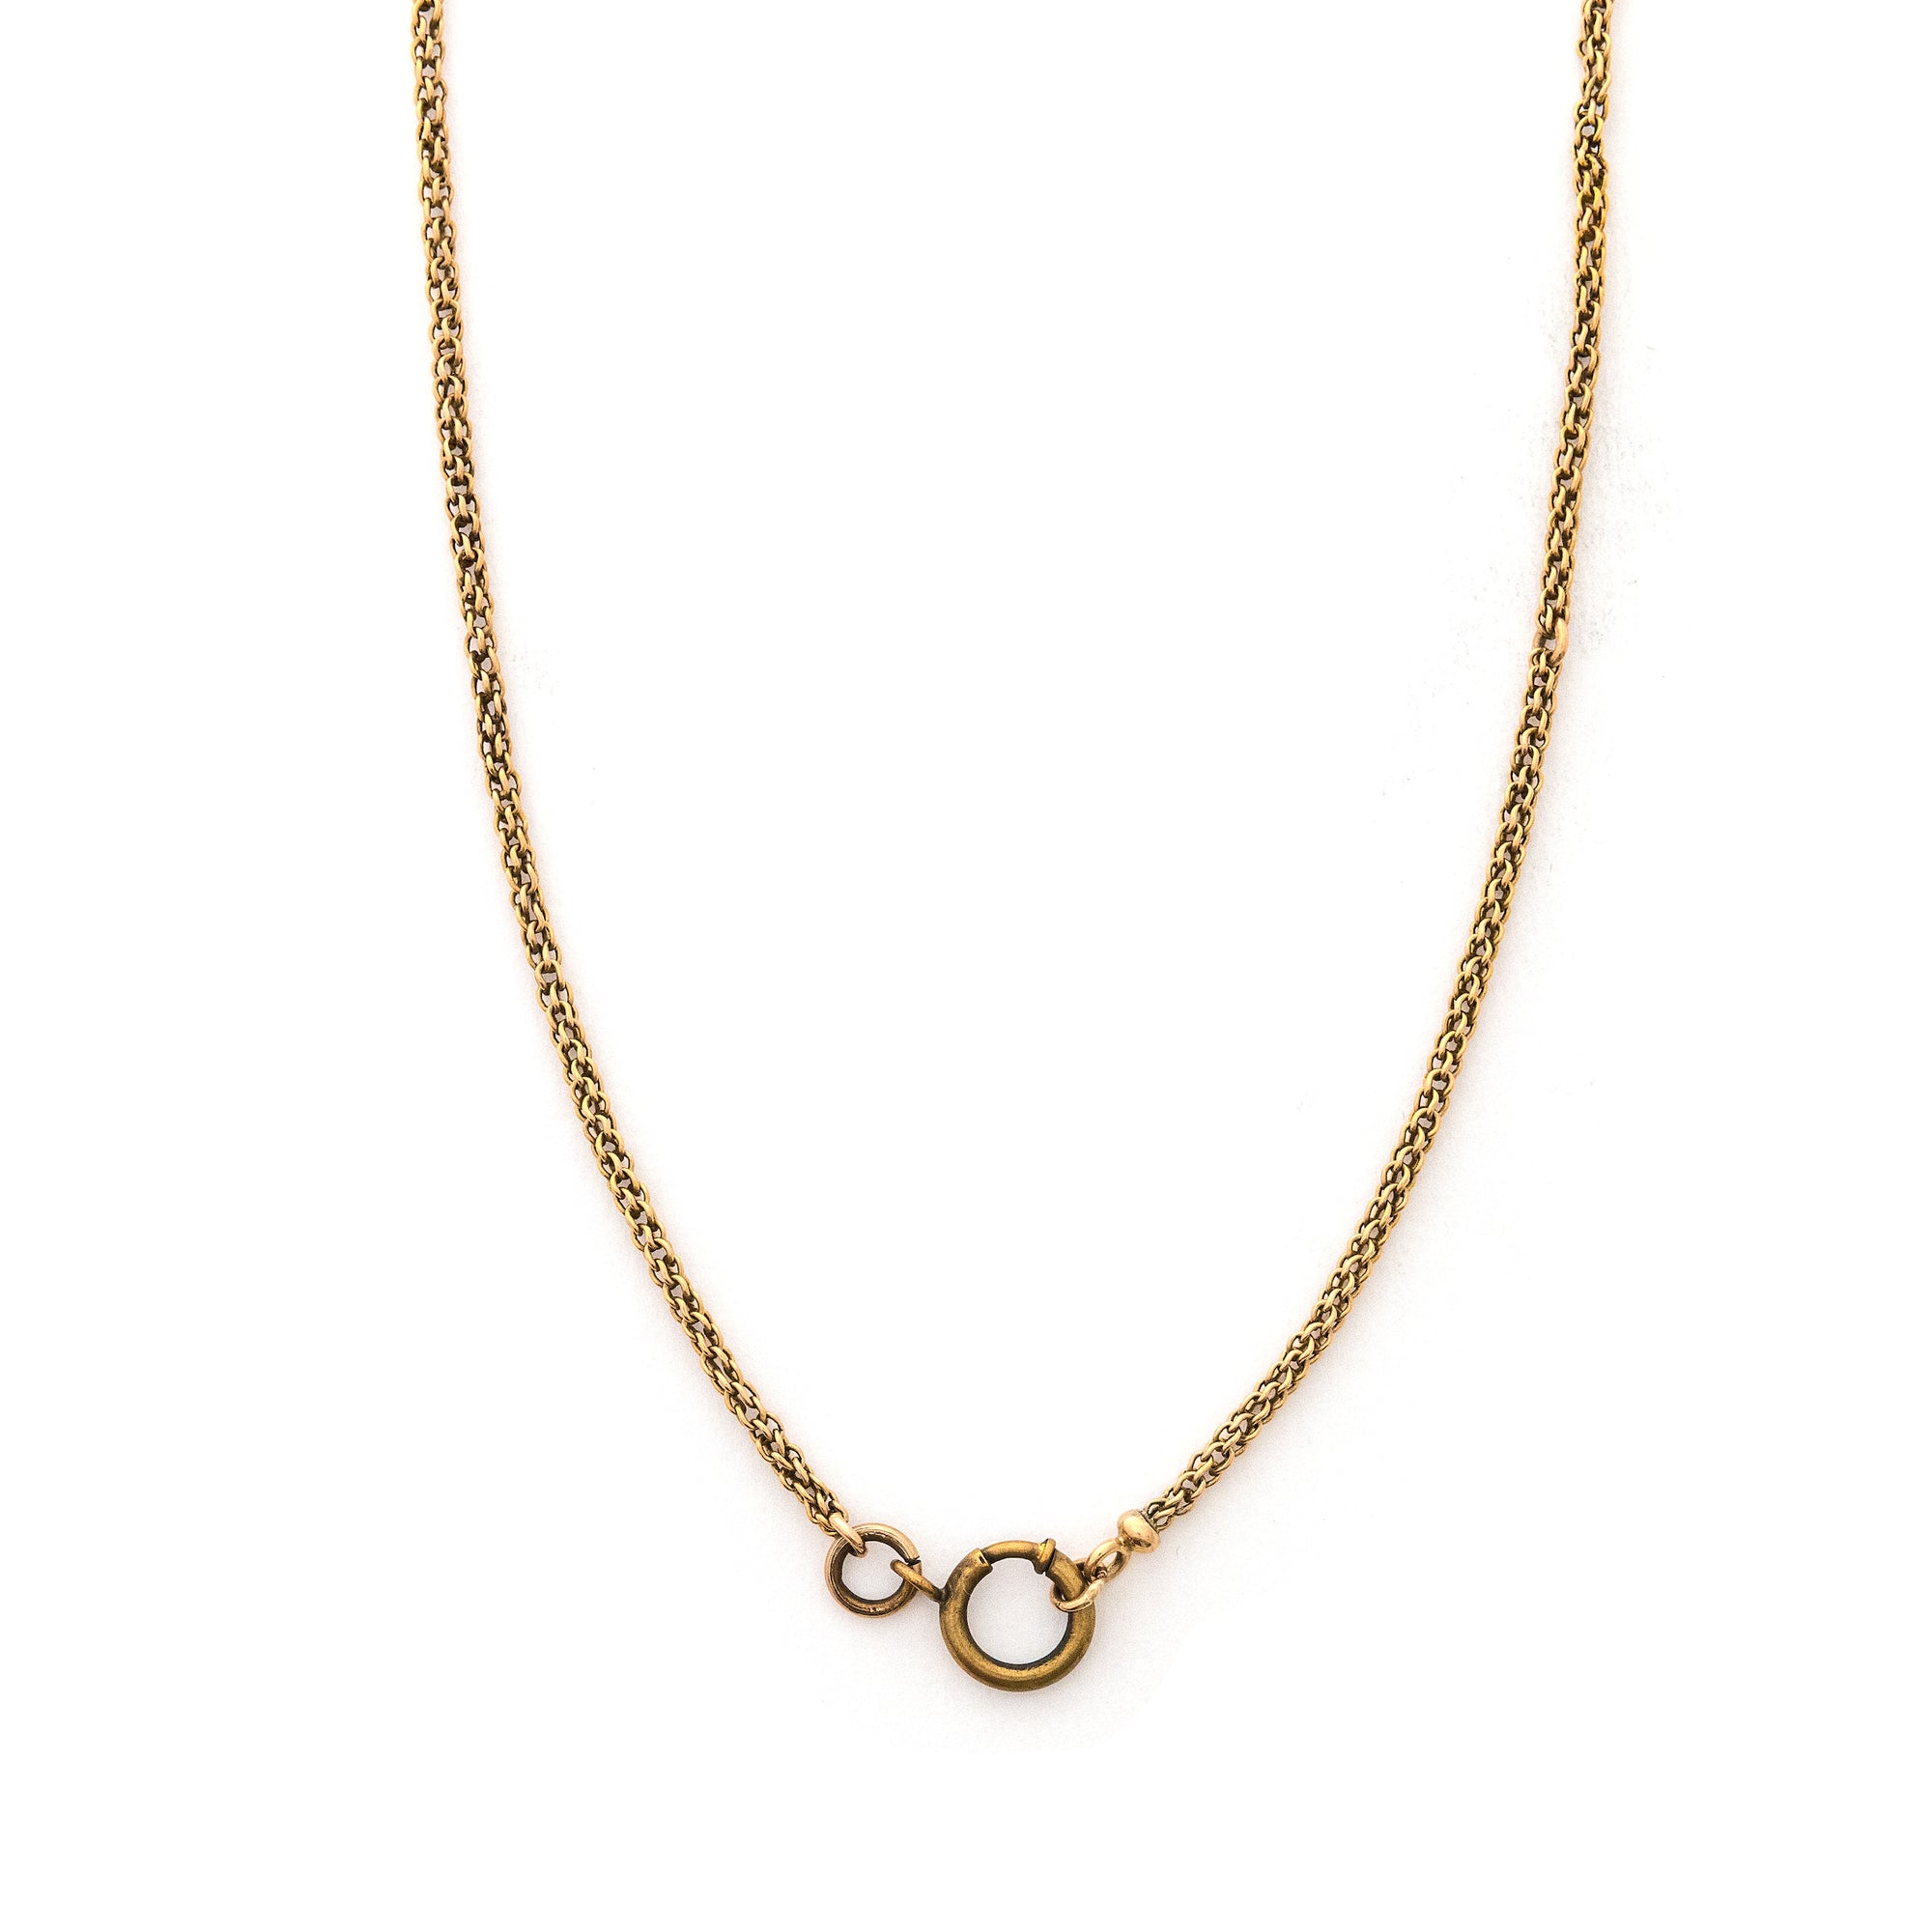 This gold fill antique round wheat chain is the perfect addition to any jewelry lovers collection. It can be worn alone, with charms or a locket, or layered with other chains for a bold statement. A true staple! Close up view